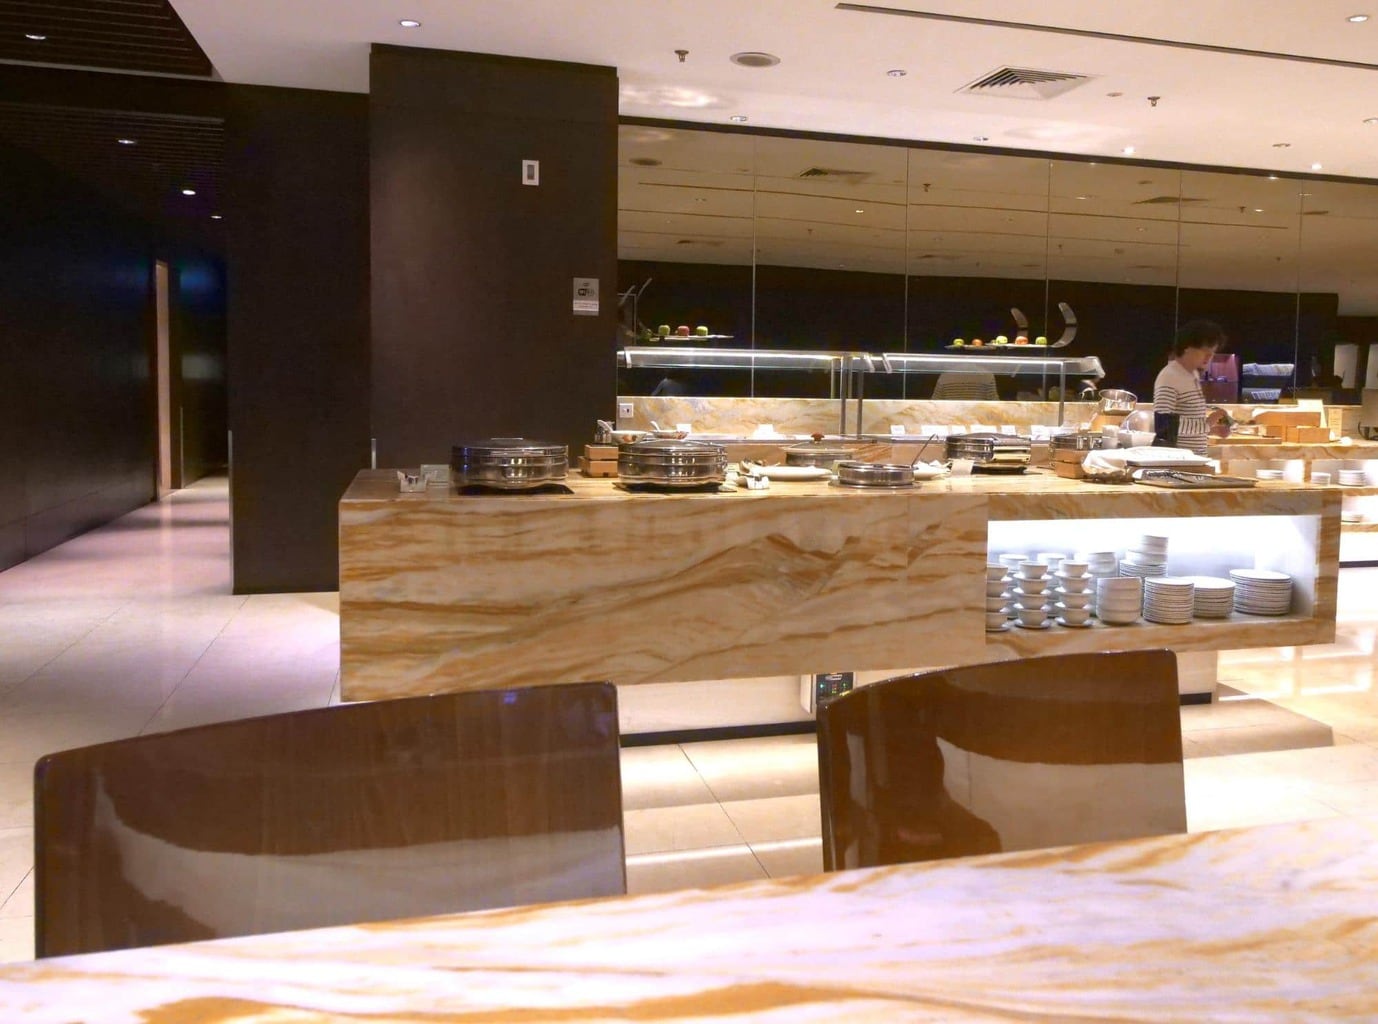 Singapore Airlines Business Class lounge at terminal 2